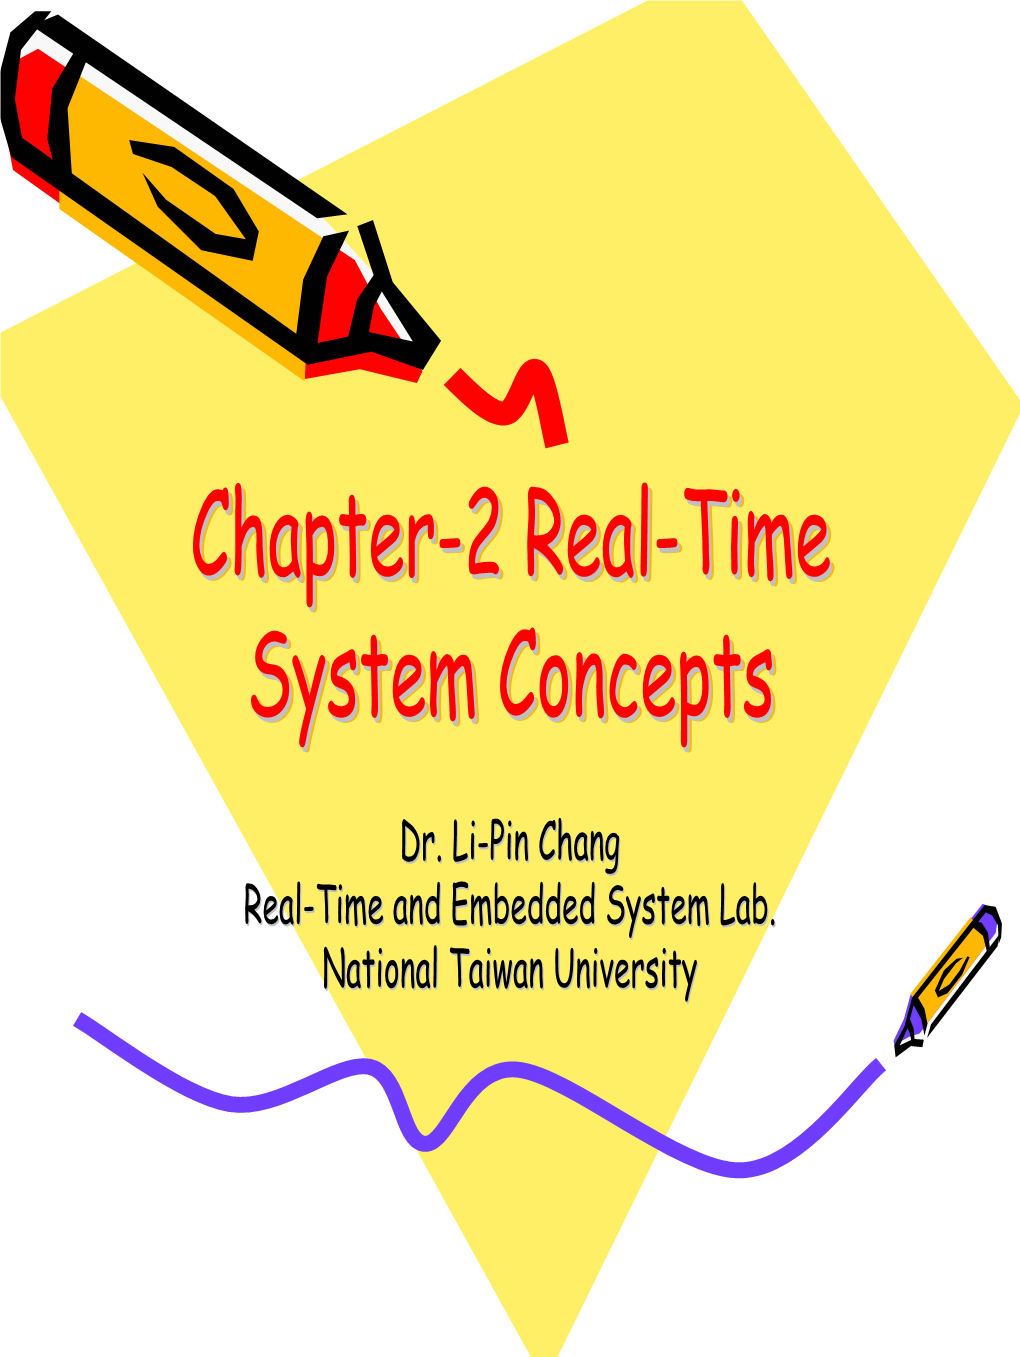 Chapter-2 Real-Time System Concepts